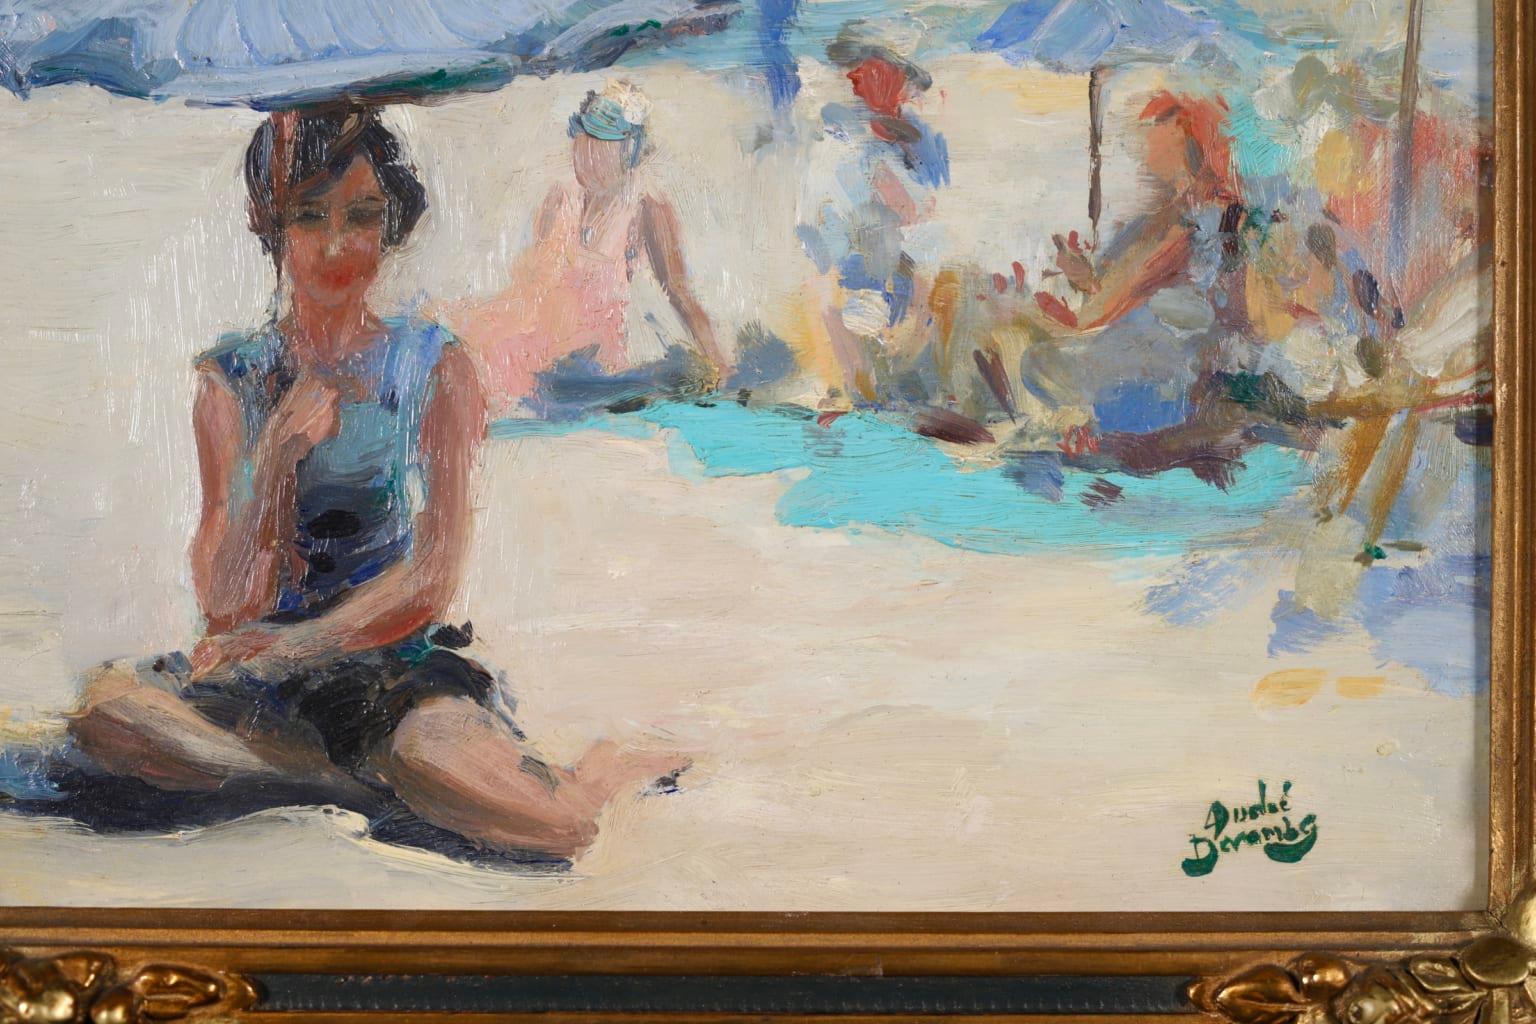 Charming oil on board figures in coastal landscape circa 1920 by French impressionist painter Andre Devambez. The piece depicts women relaxing on a white sand beach on a beautiful summer's day, the crystal blue sea visible in the distance. A